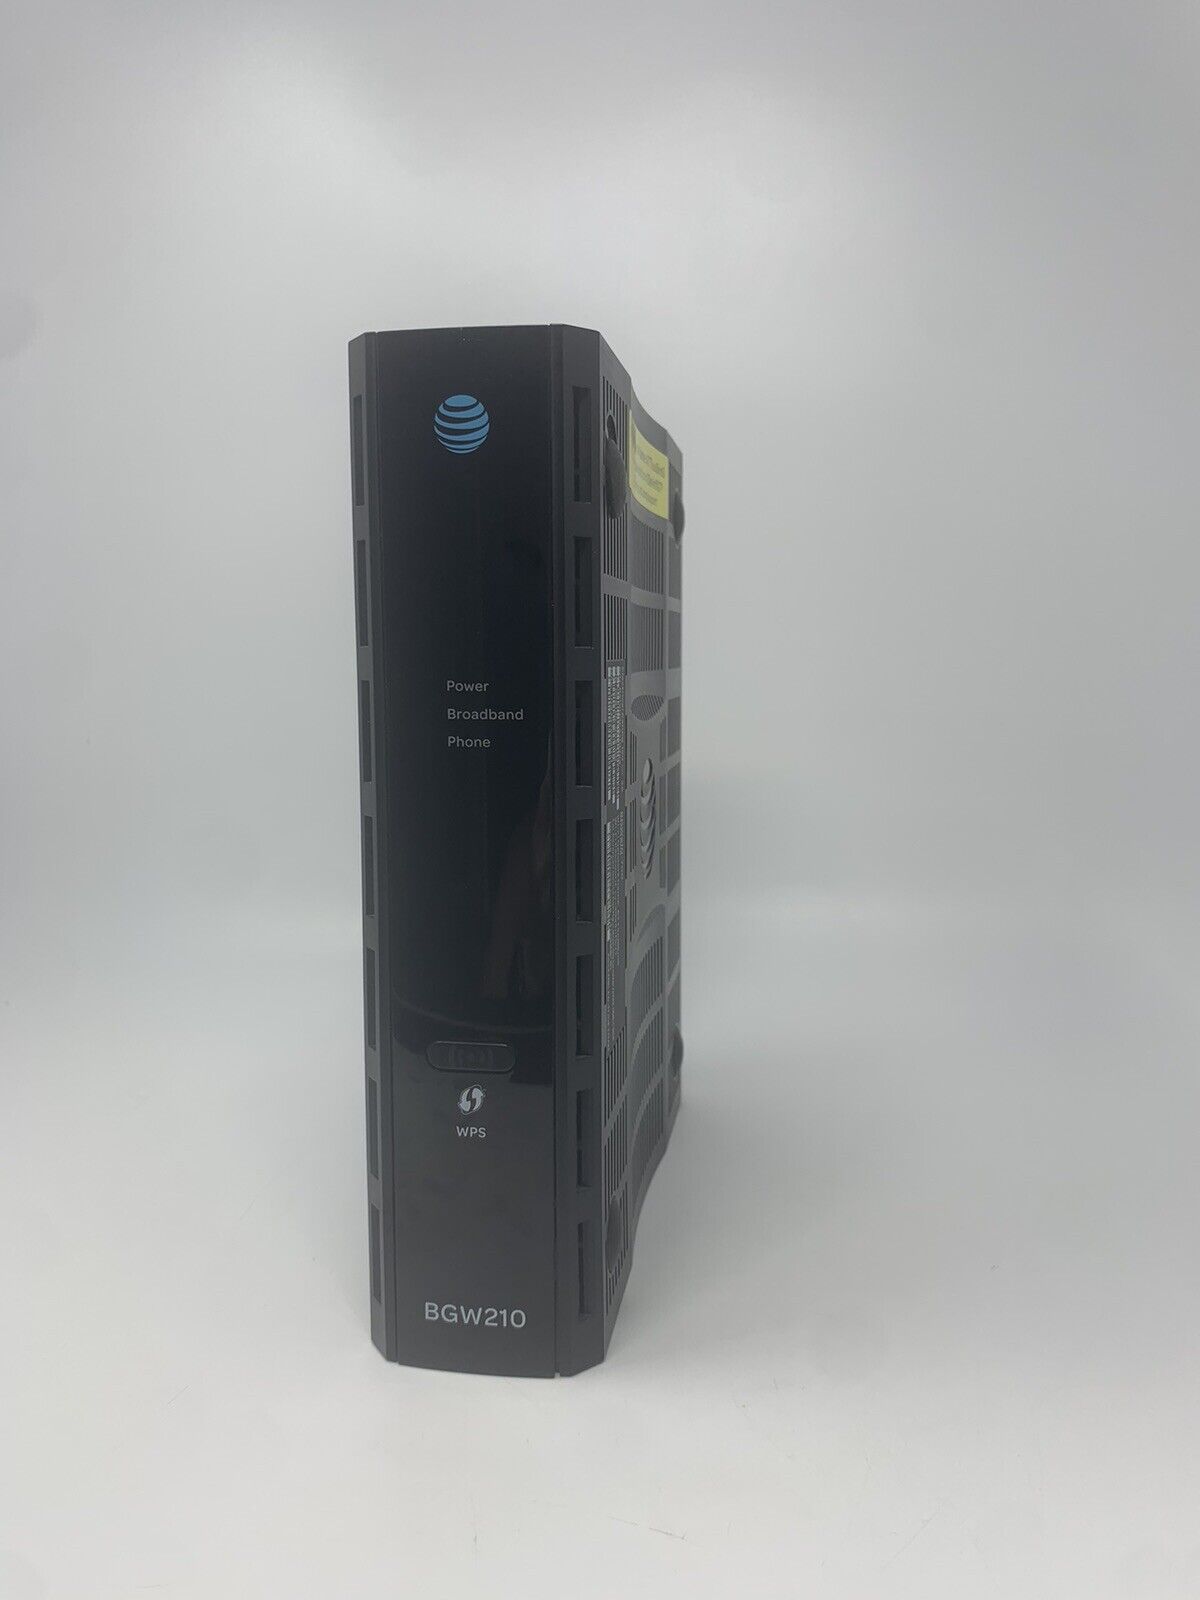 AT&T Arris BGW210-700 Broadband Gateway WiFi Modem Router only - no cables